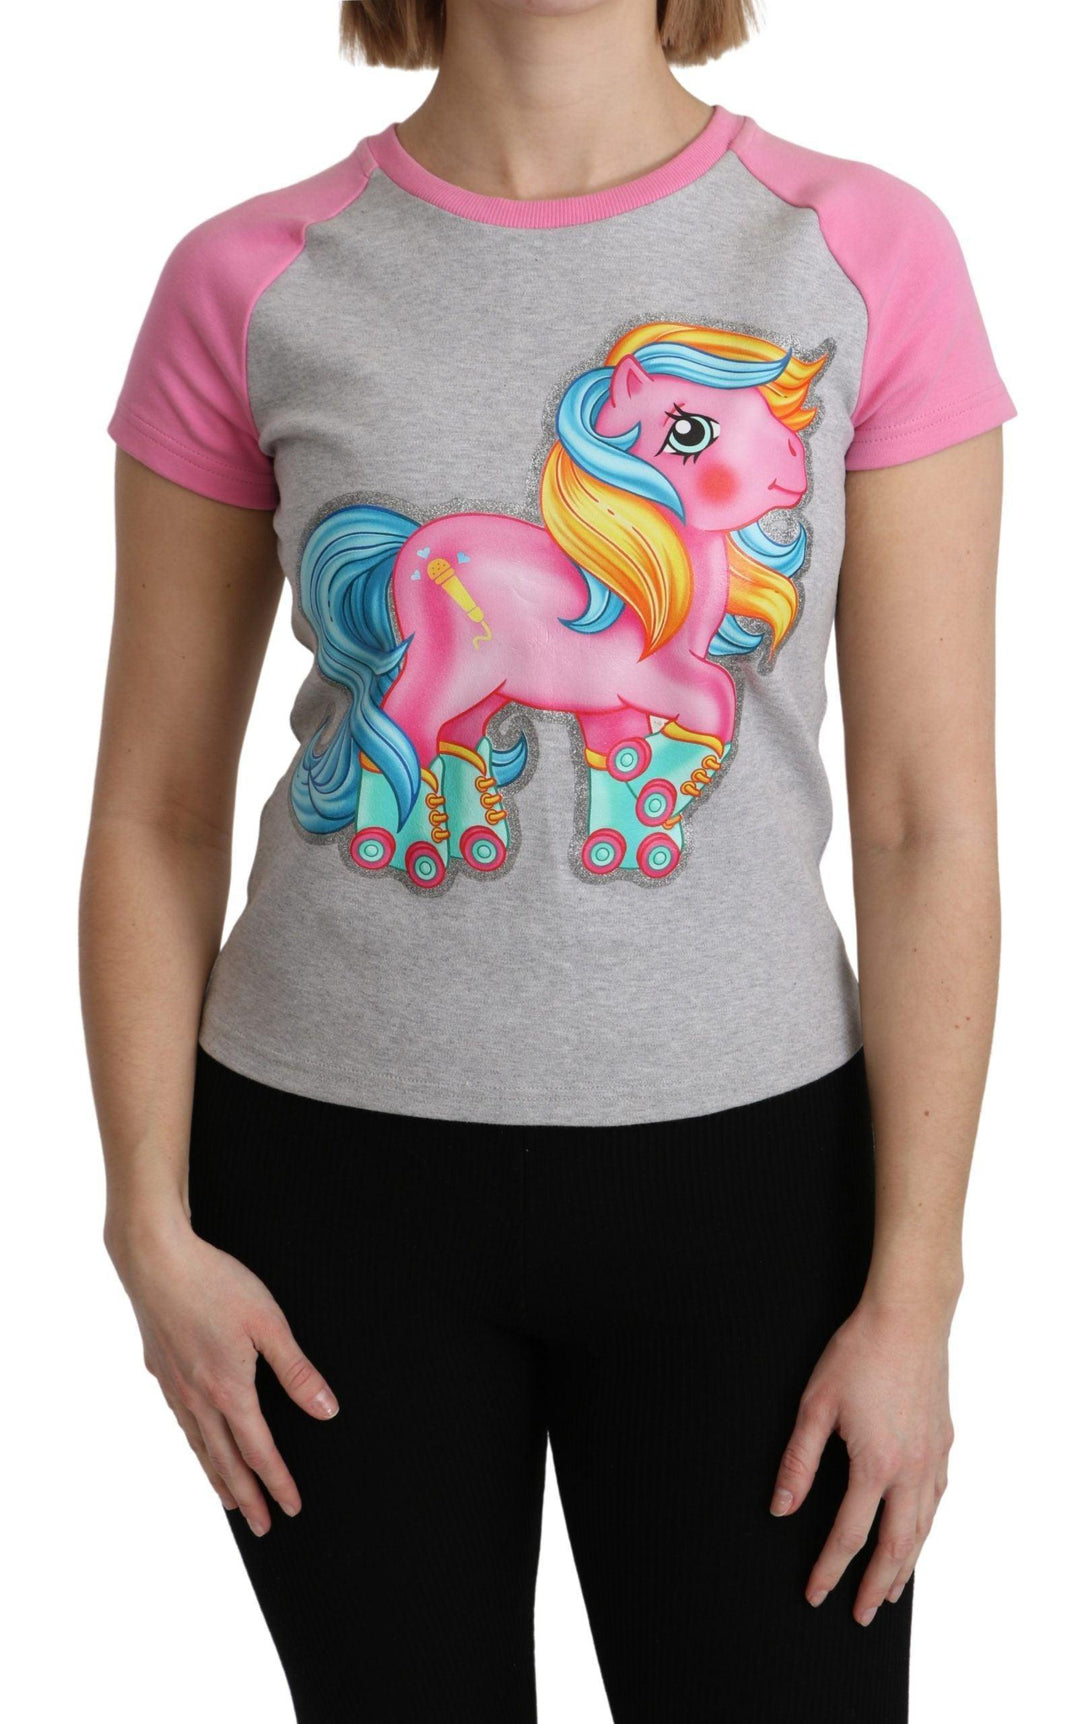 Moschino Gray and pink Cotton T-shirt My Little Pony Top - Ellie Belle